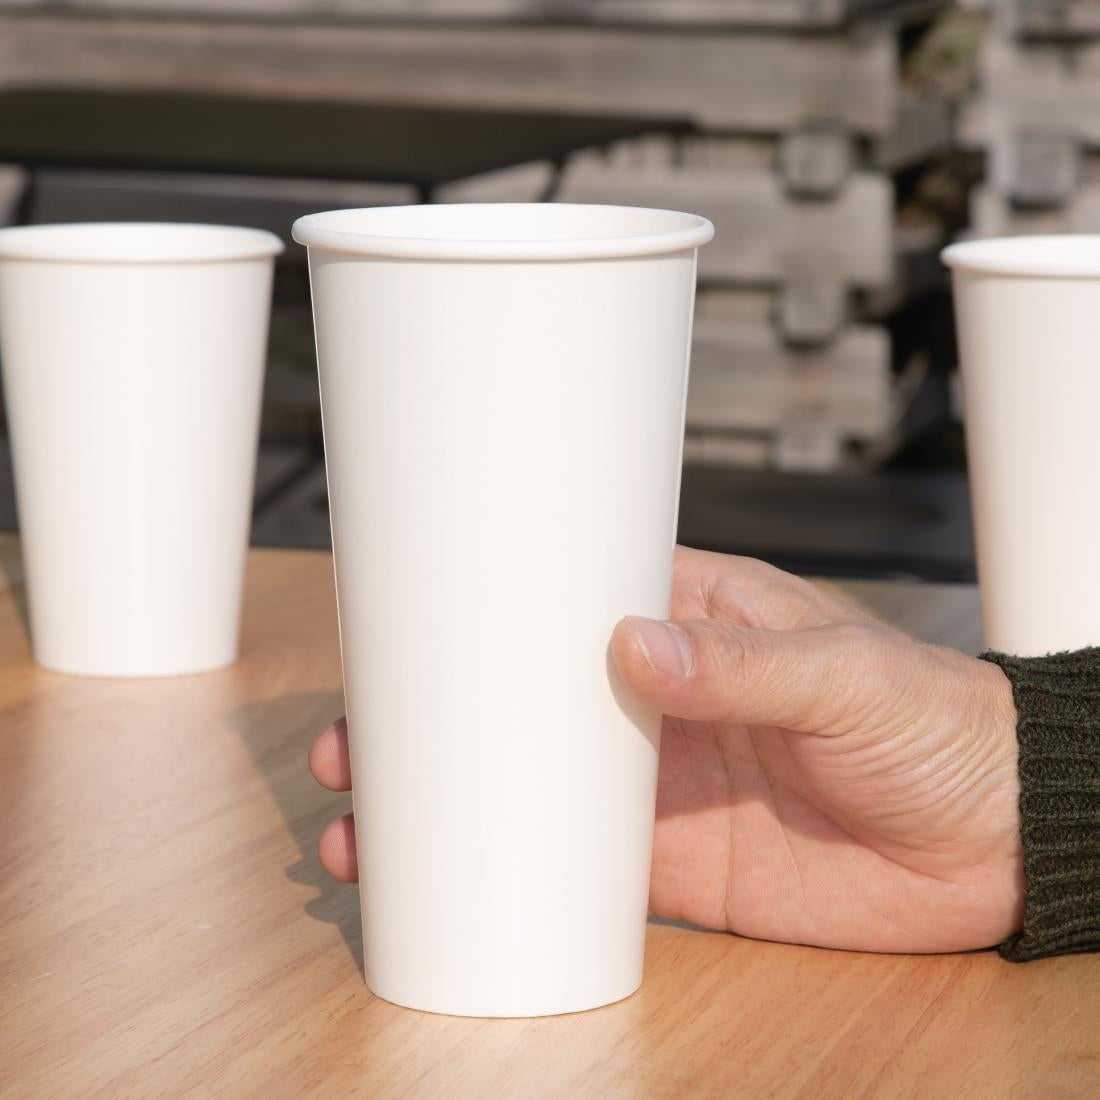 FP782 Fiesta Recyclable Cold Paper Cup 22oz 90mm (Pack of 1000) JD Catering Equipment Solutions Ltd